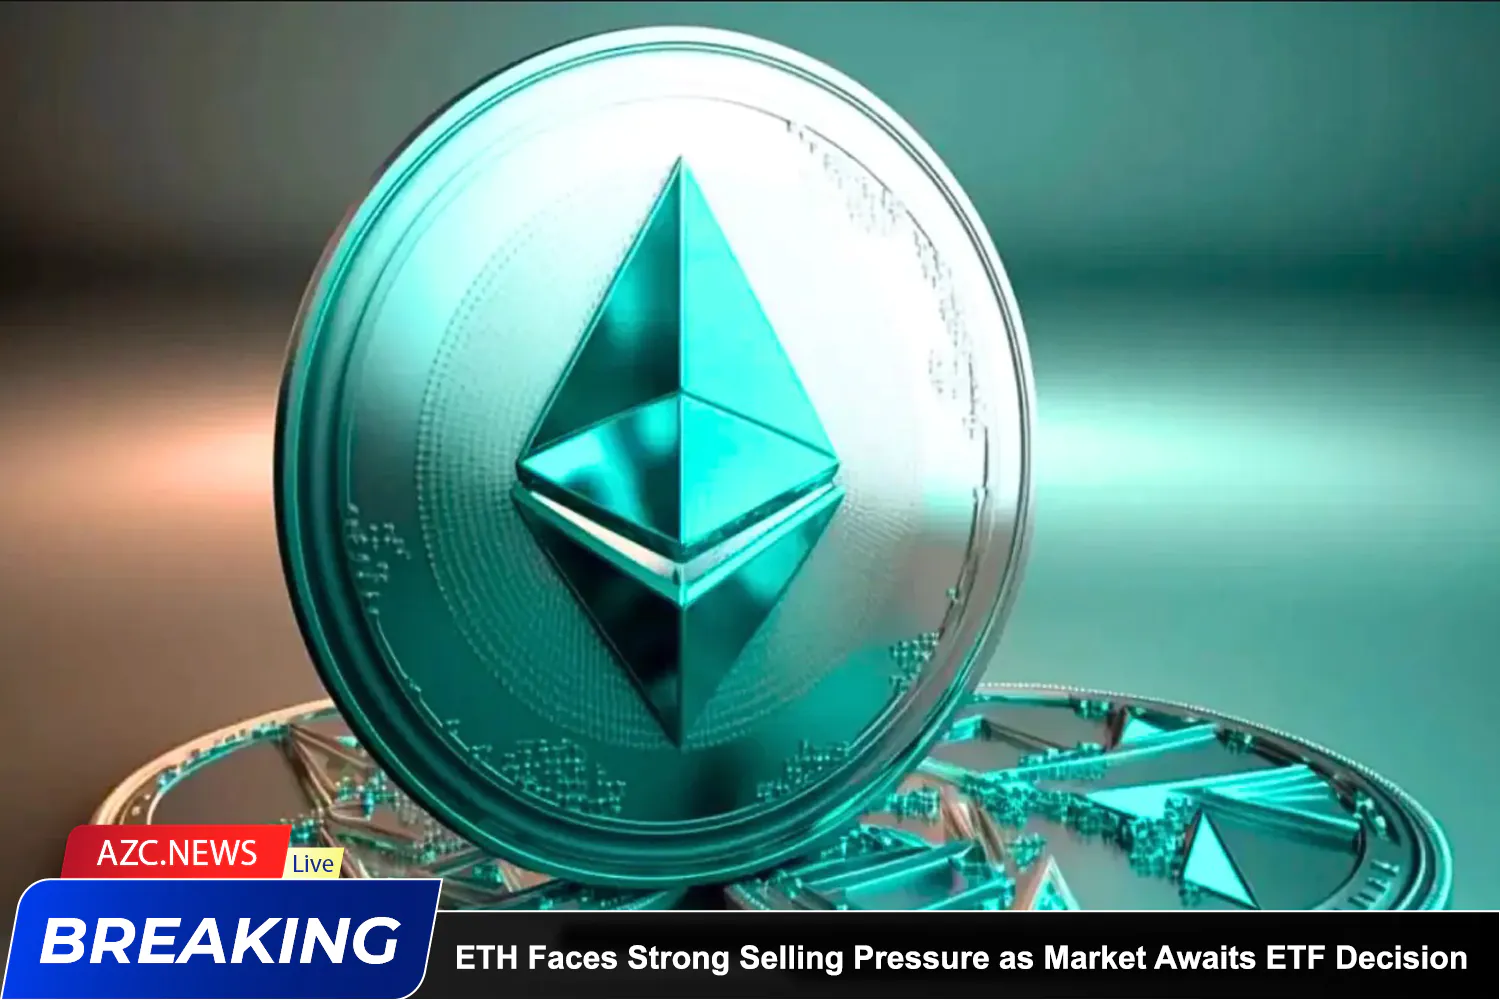 Azcnews Eth Faces Strong Selling Pressure As Market Awaits Etf Decision